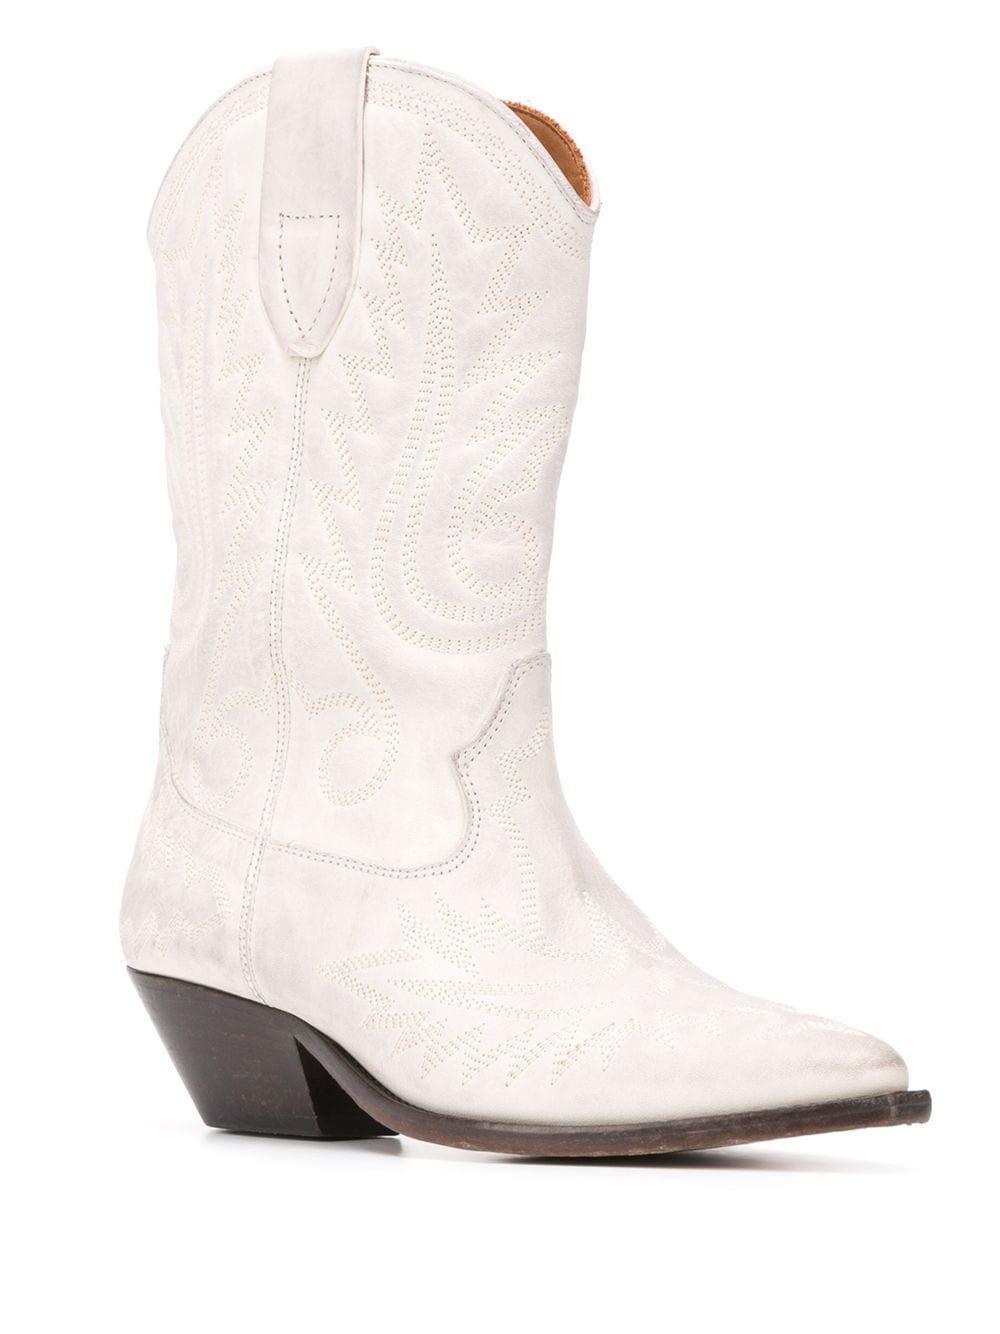 Isabel Marant Duerto Texan Ankle Boots in White | Lyst